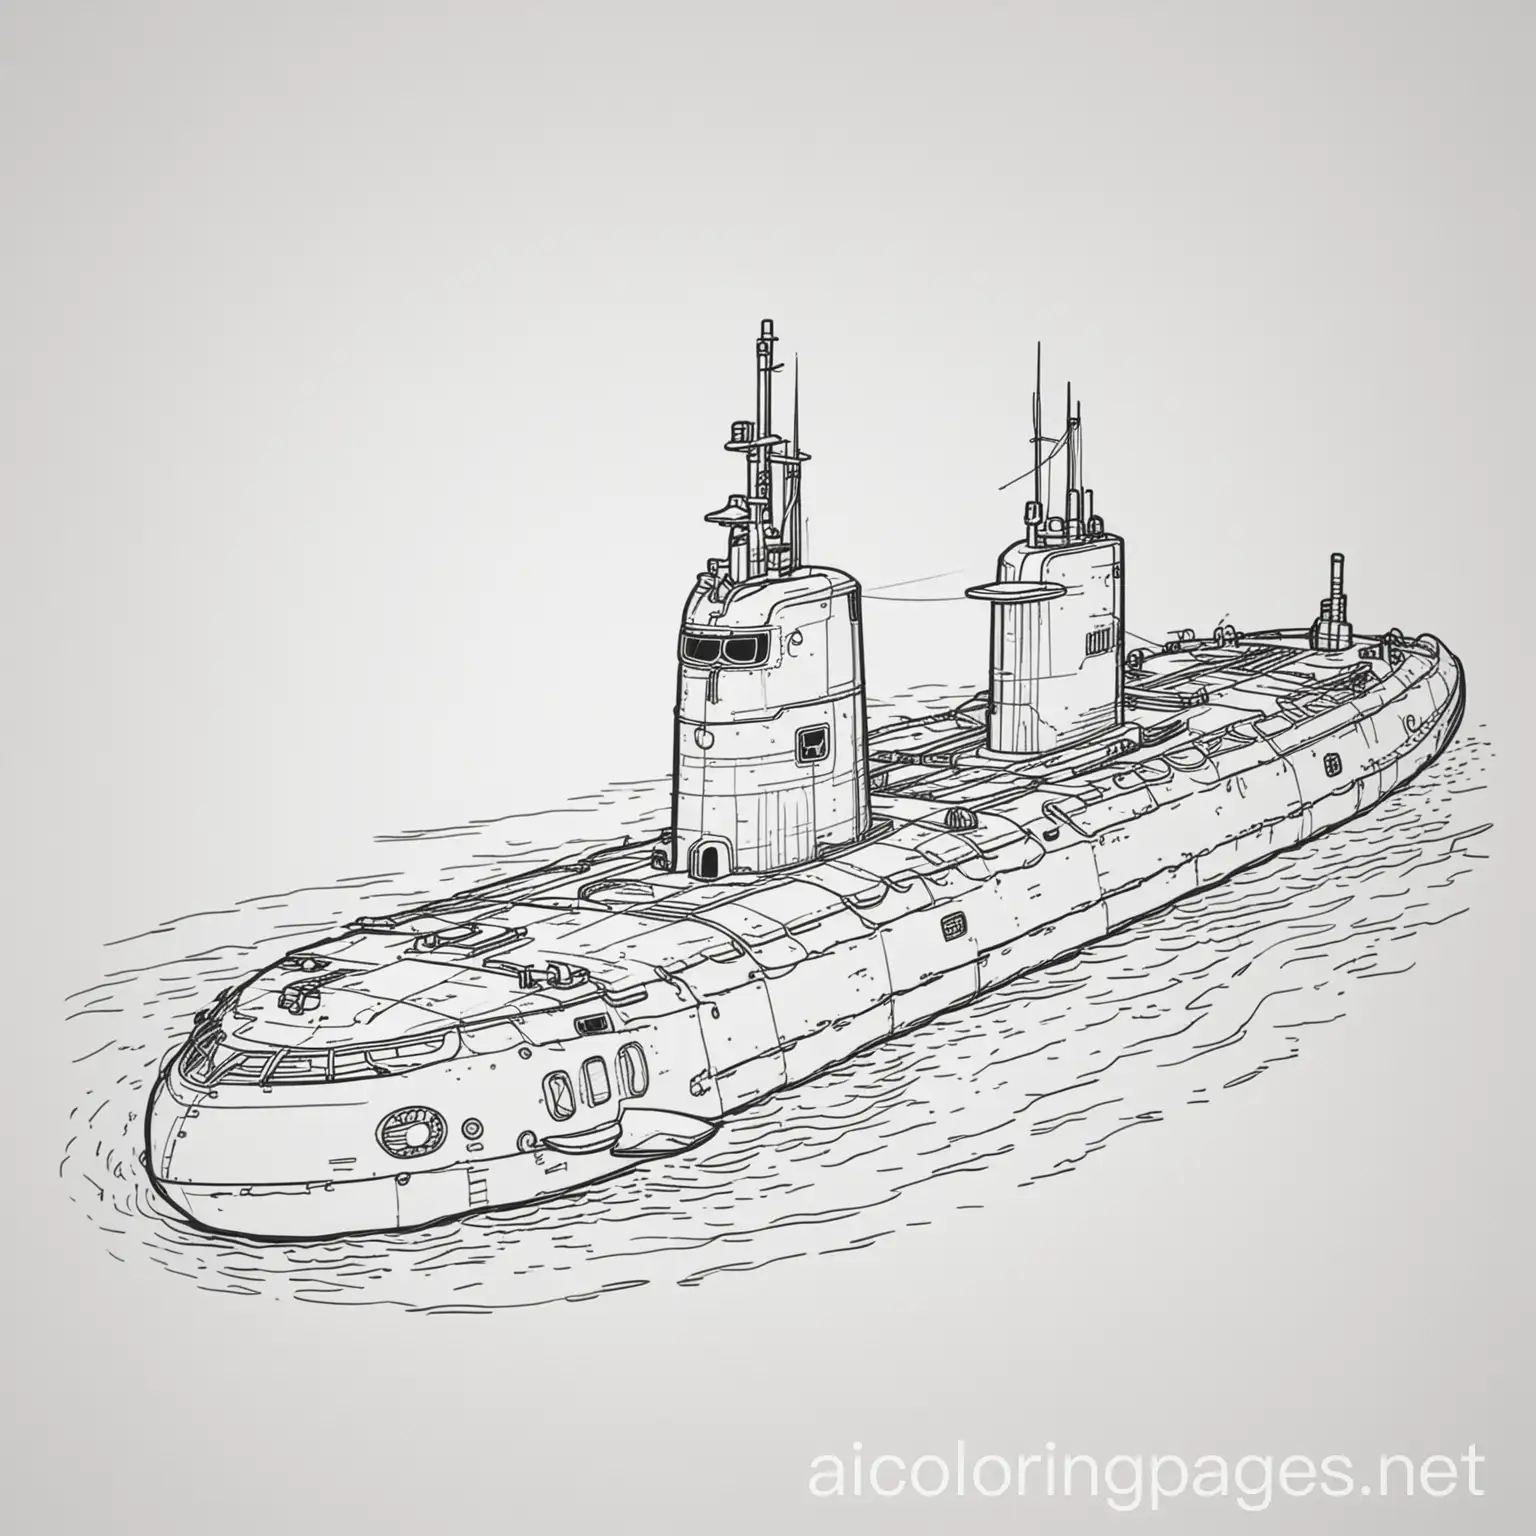 Military-Submarine-Coloring-Page-Simple-Line-Art-on-White-Background